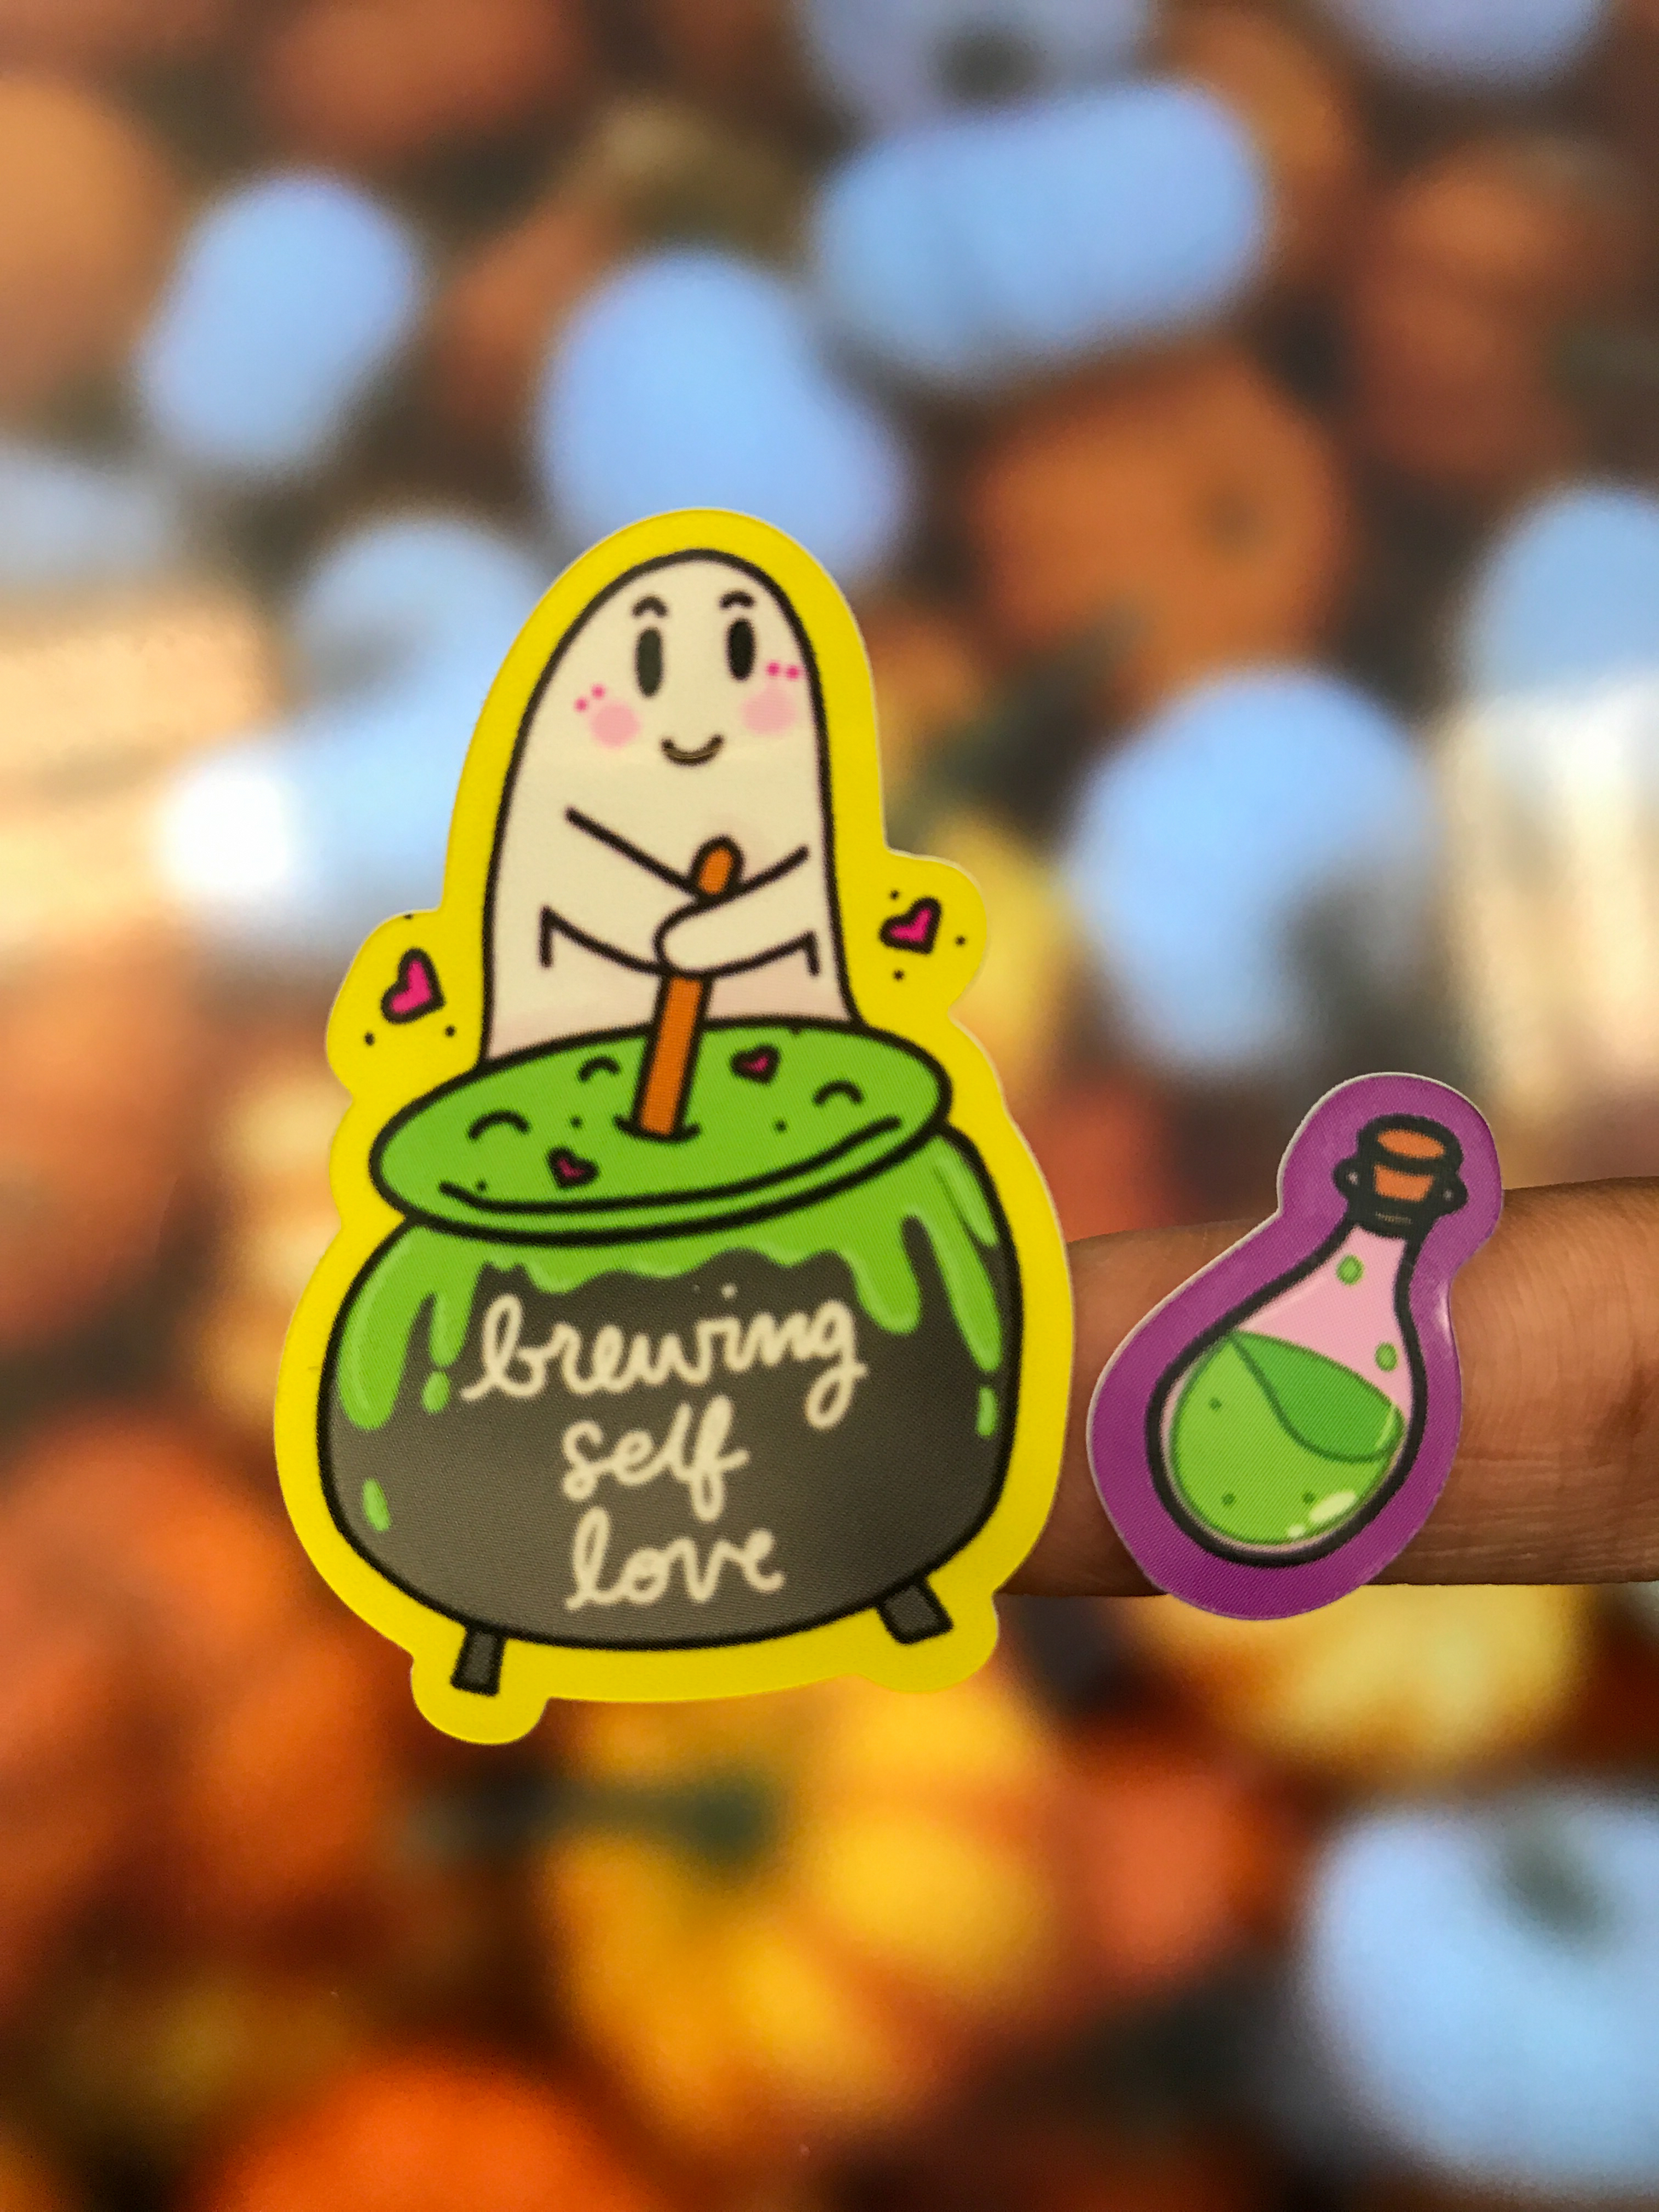 Brewing Self Love Ghost sticker and Potion Bottle sticker